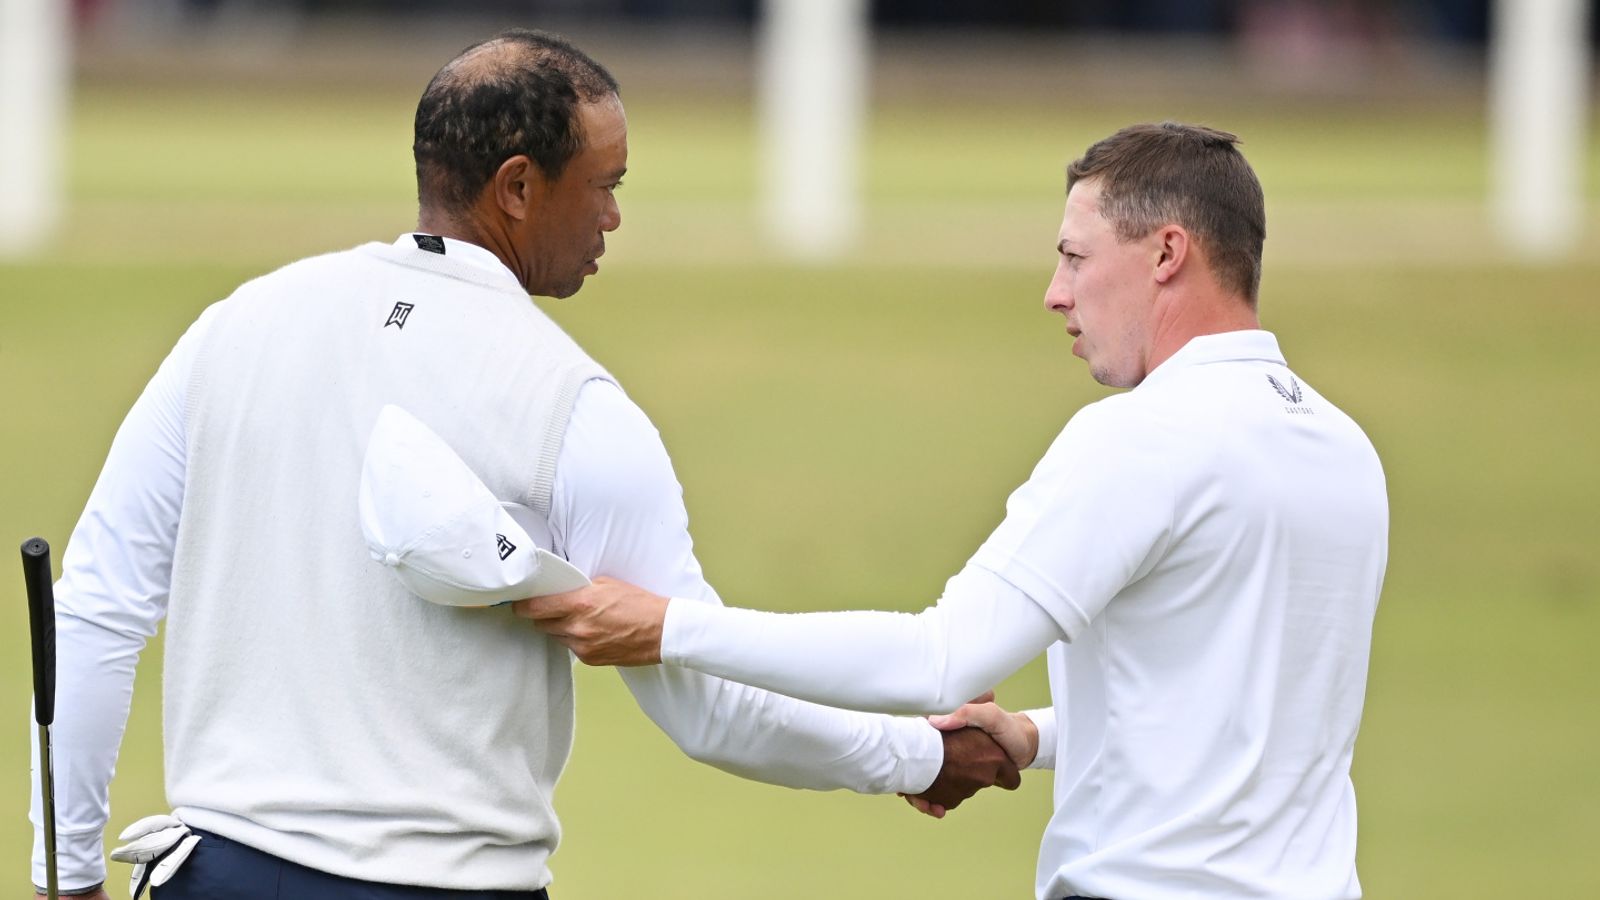 The 150th Open: Players pay tribute to Tiger Woods after emotional missed cut at St Andrews